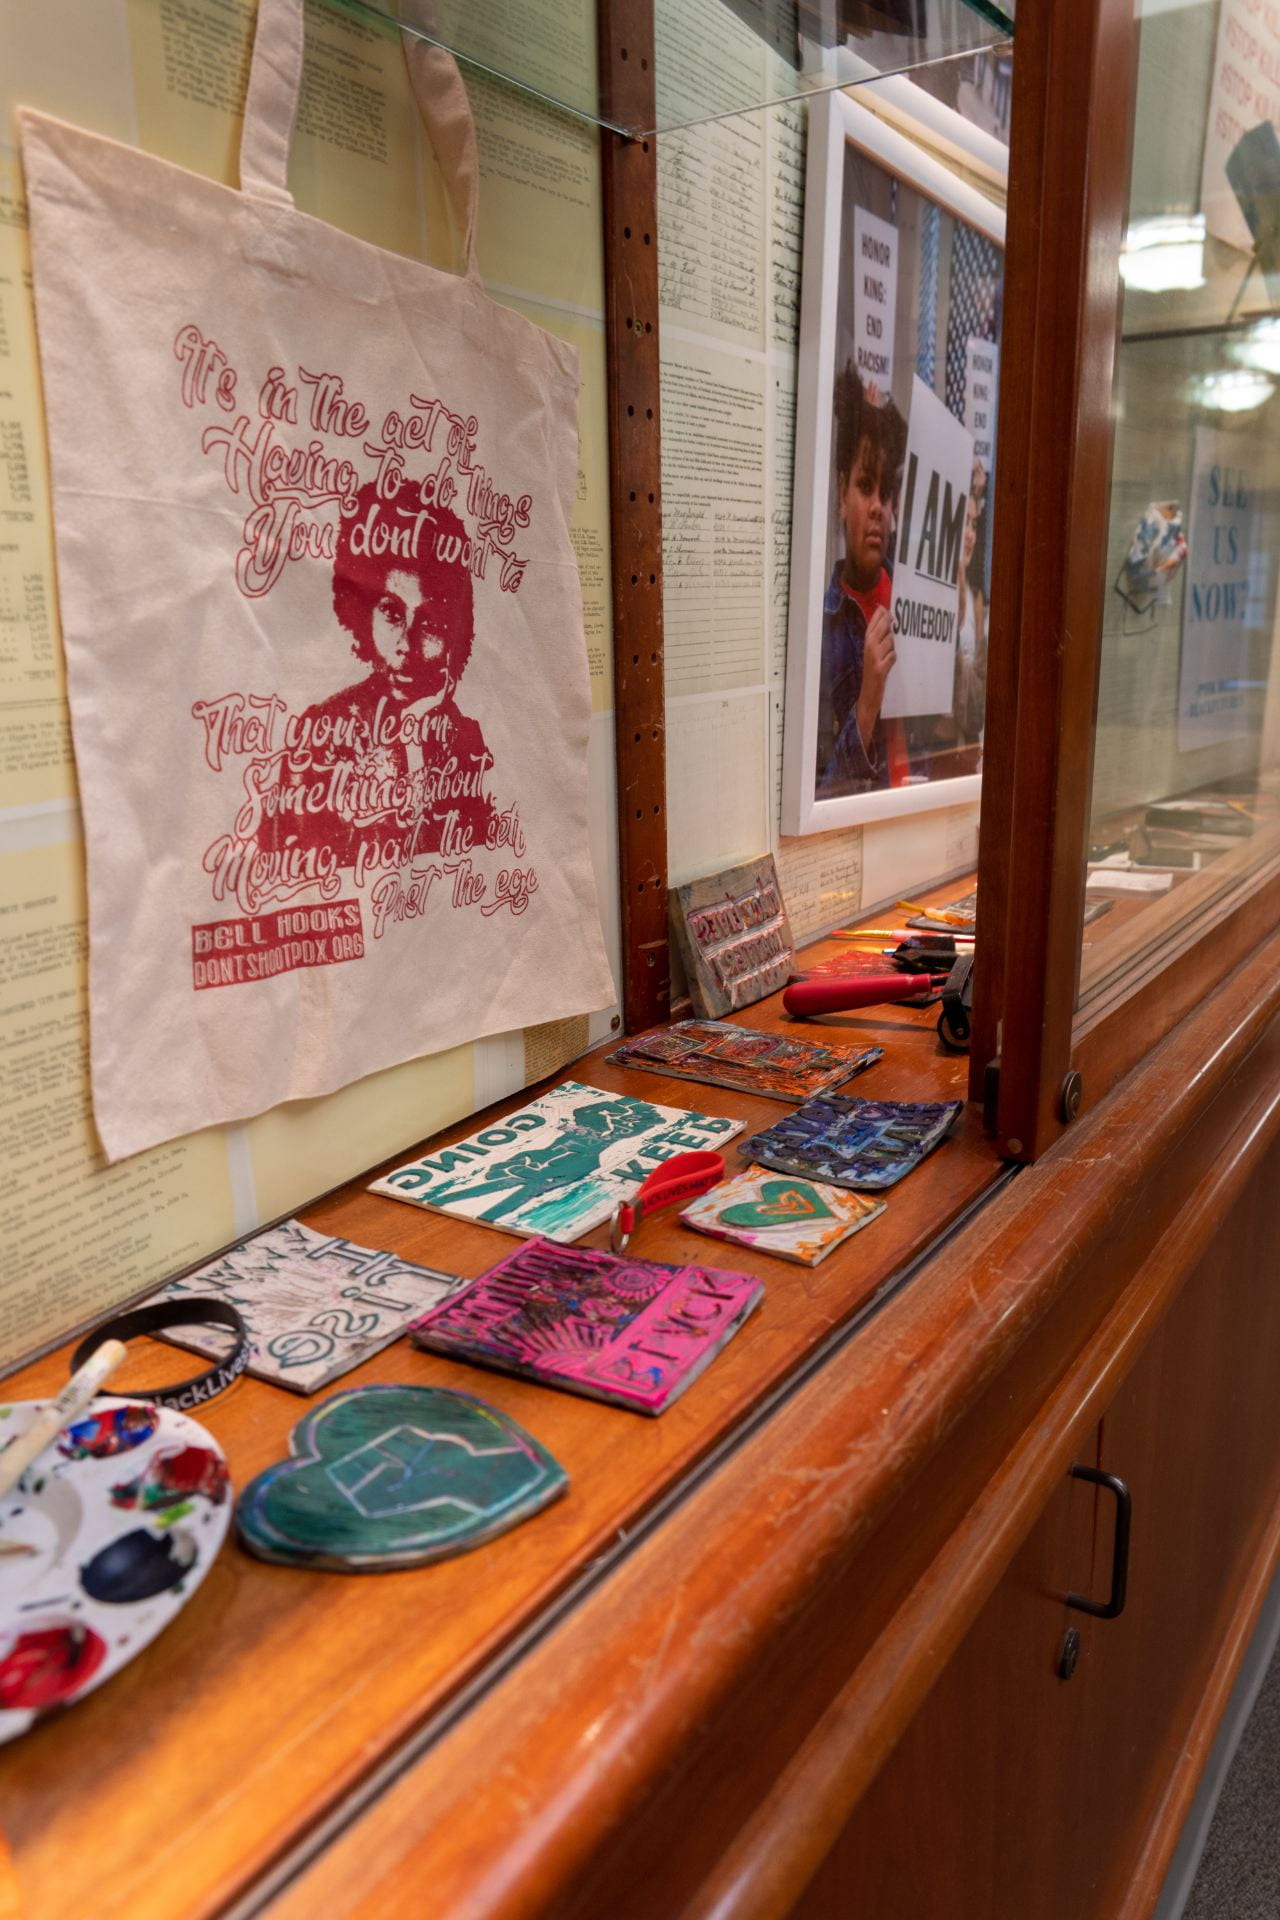 Case exhibiting Community Art projects, specifically "Bag Swag" distributed at Don't Shoot PDX to encourage art practice within the social justice movement